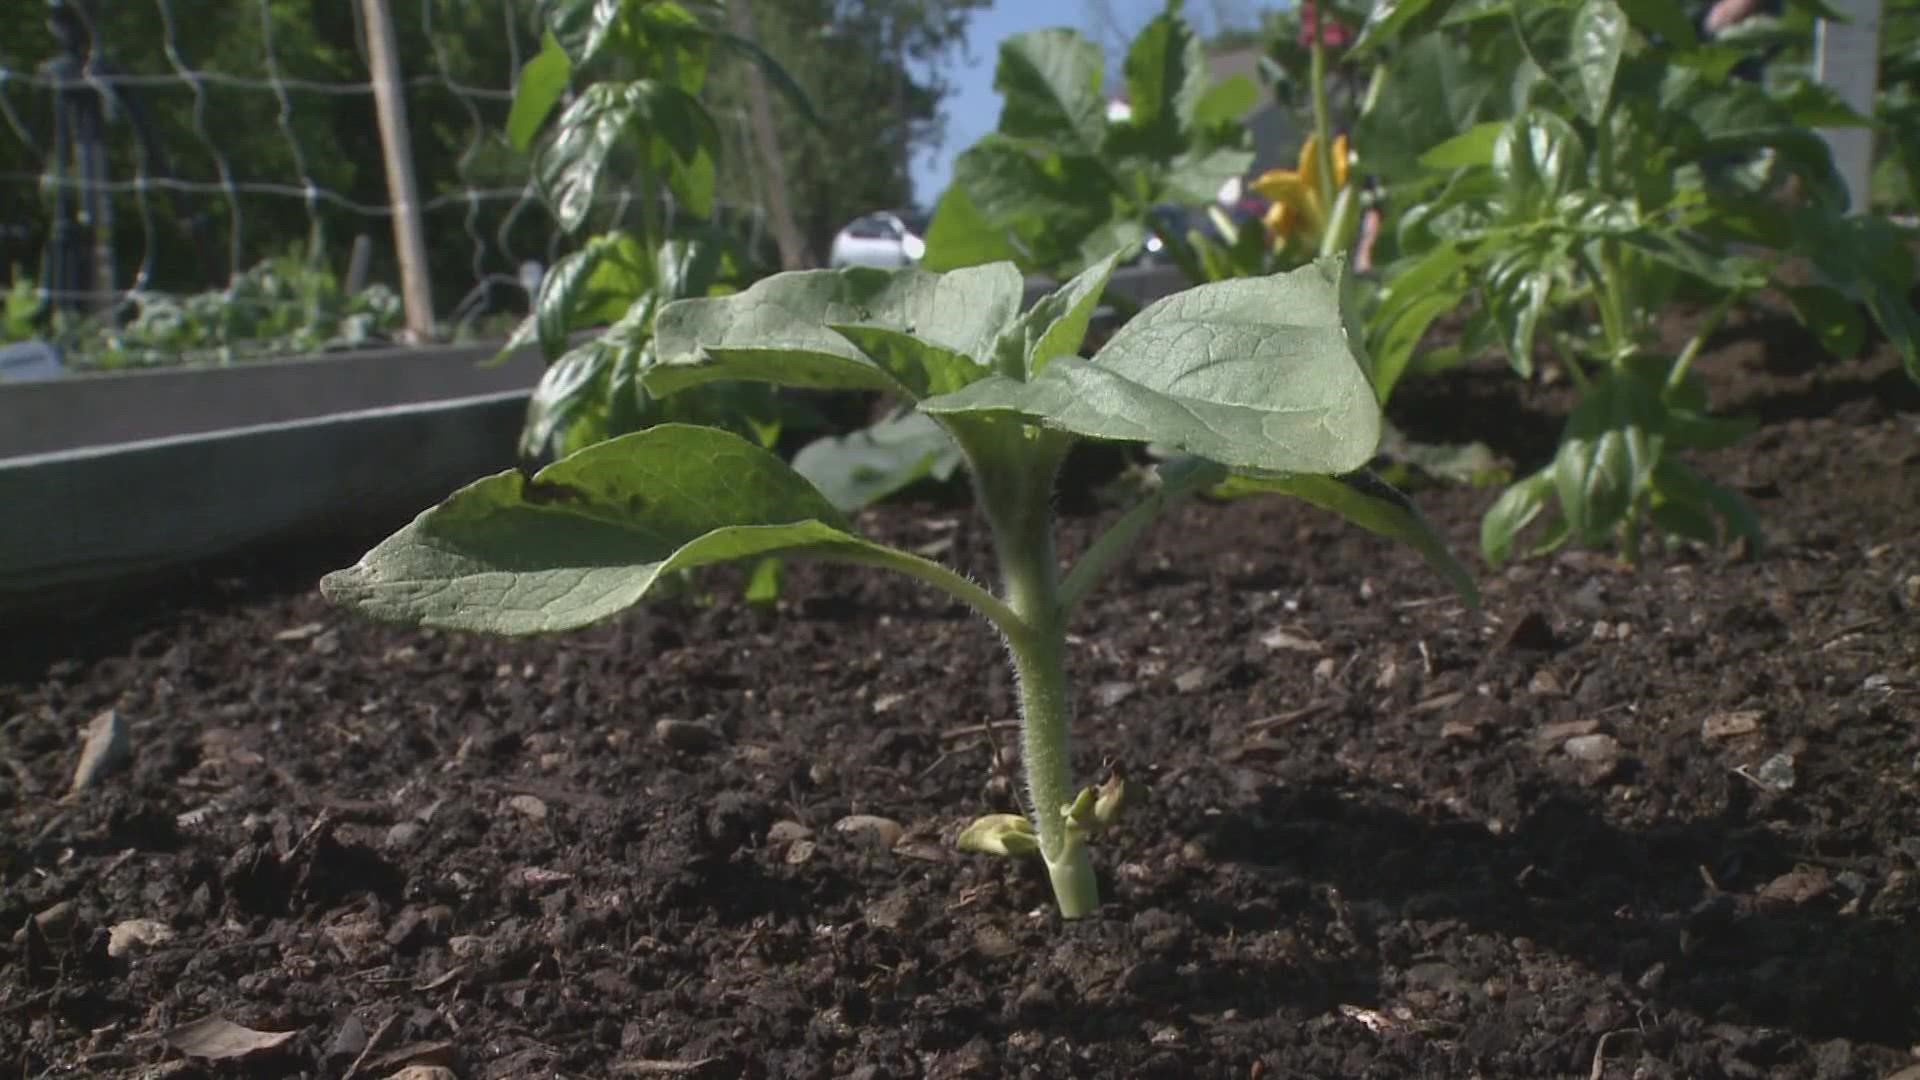 A new community garden on the west end of South Portland is growing all sorts of fresh and organic produce, herbs, fruits, and veggies.